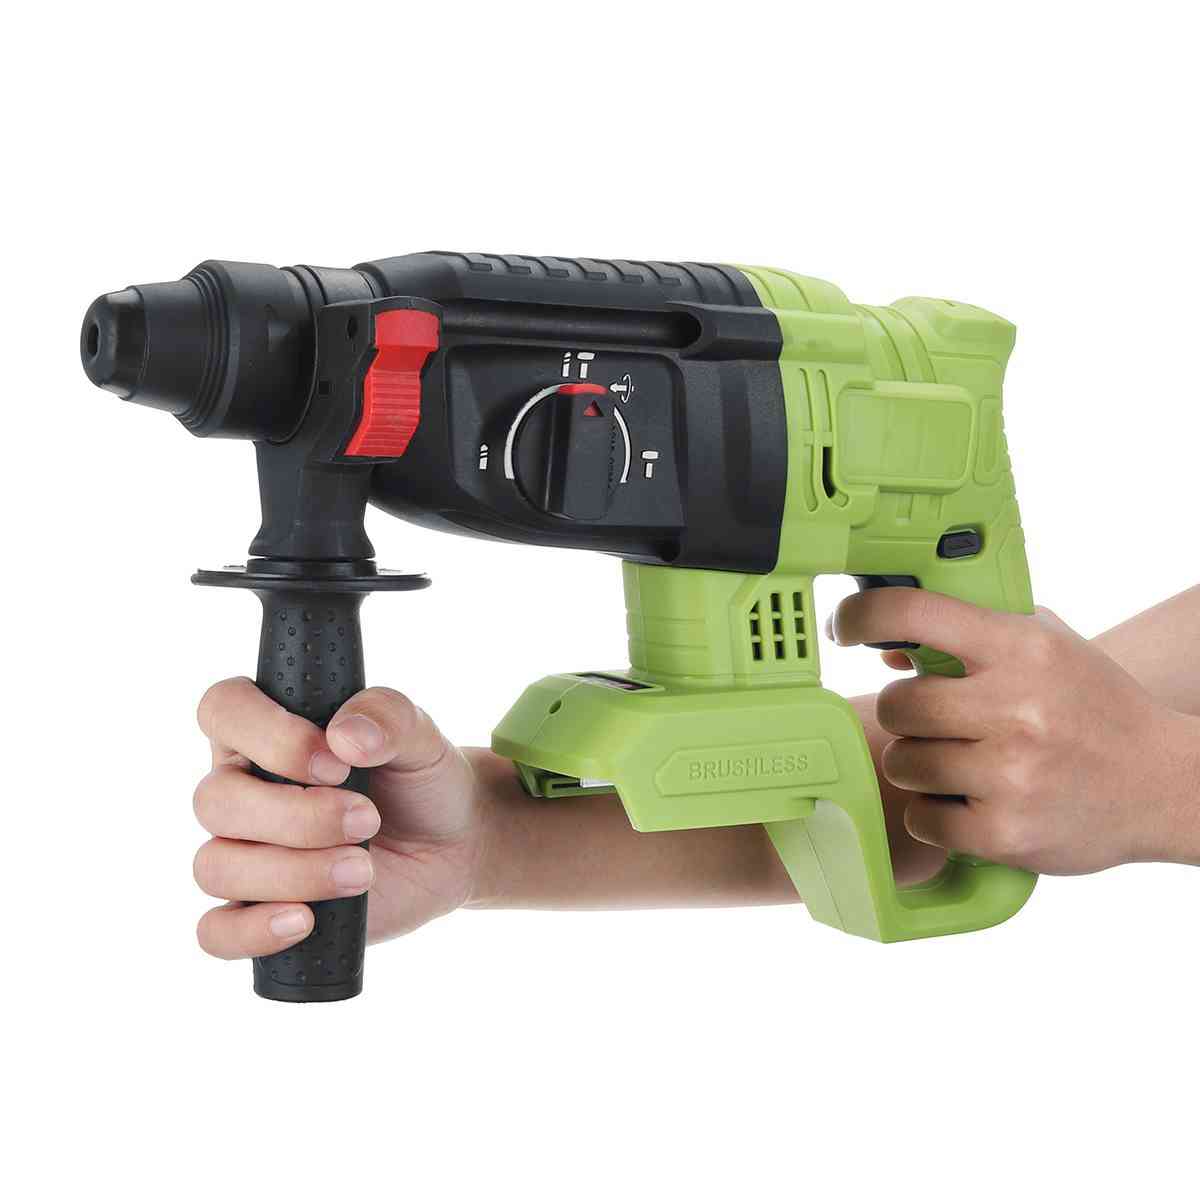 Electric Cordless, Brushless Hammer, Concrete Breaker Punch, Power Drill Tool